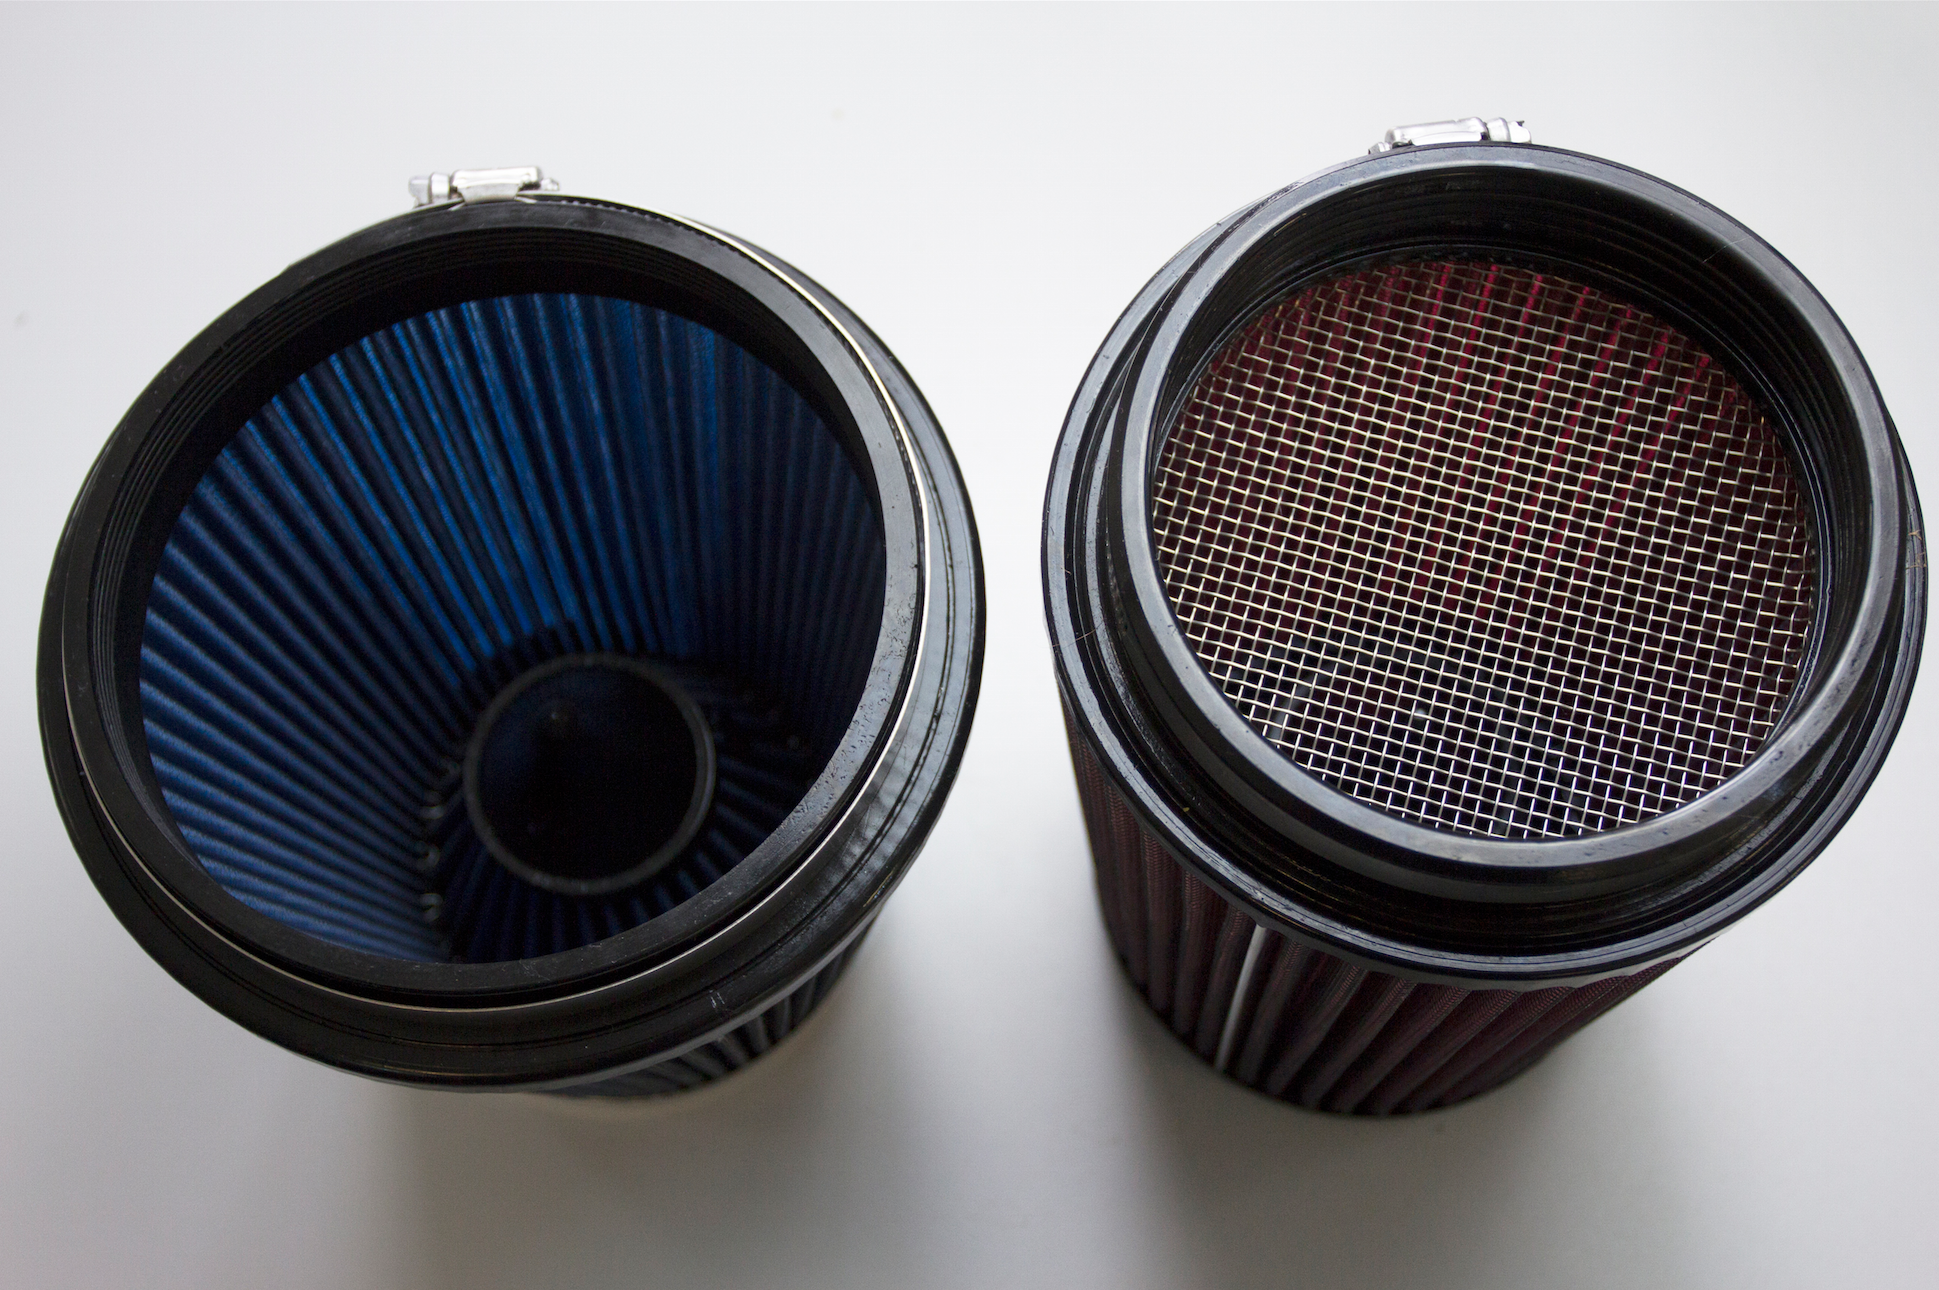 S550 Cold Air Intake Filter Comparison